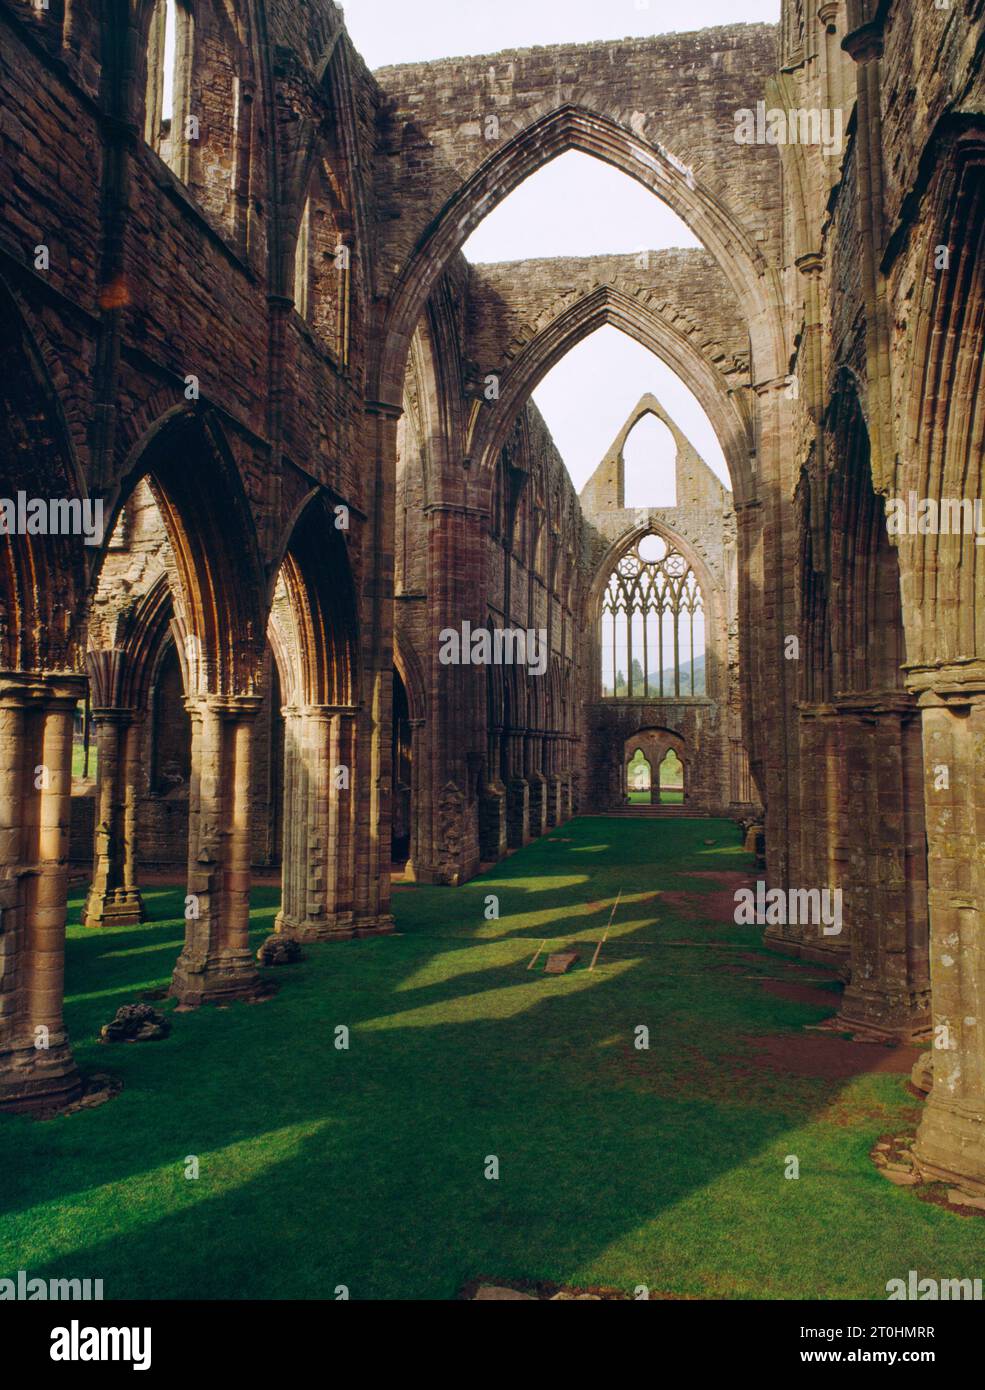 The interior of Tintern Abbey Cistercian monastic church, Wales, UK, looking from the chancel to the W end with the S aisles & transept on the left. Stock Photo